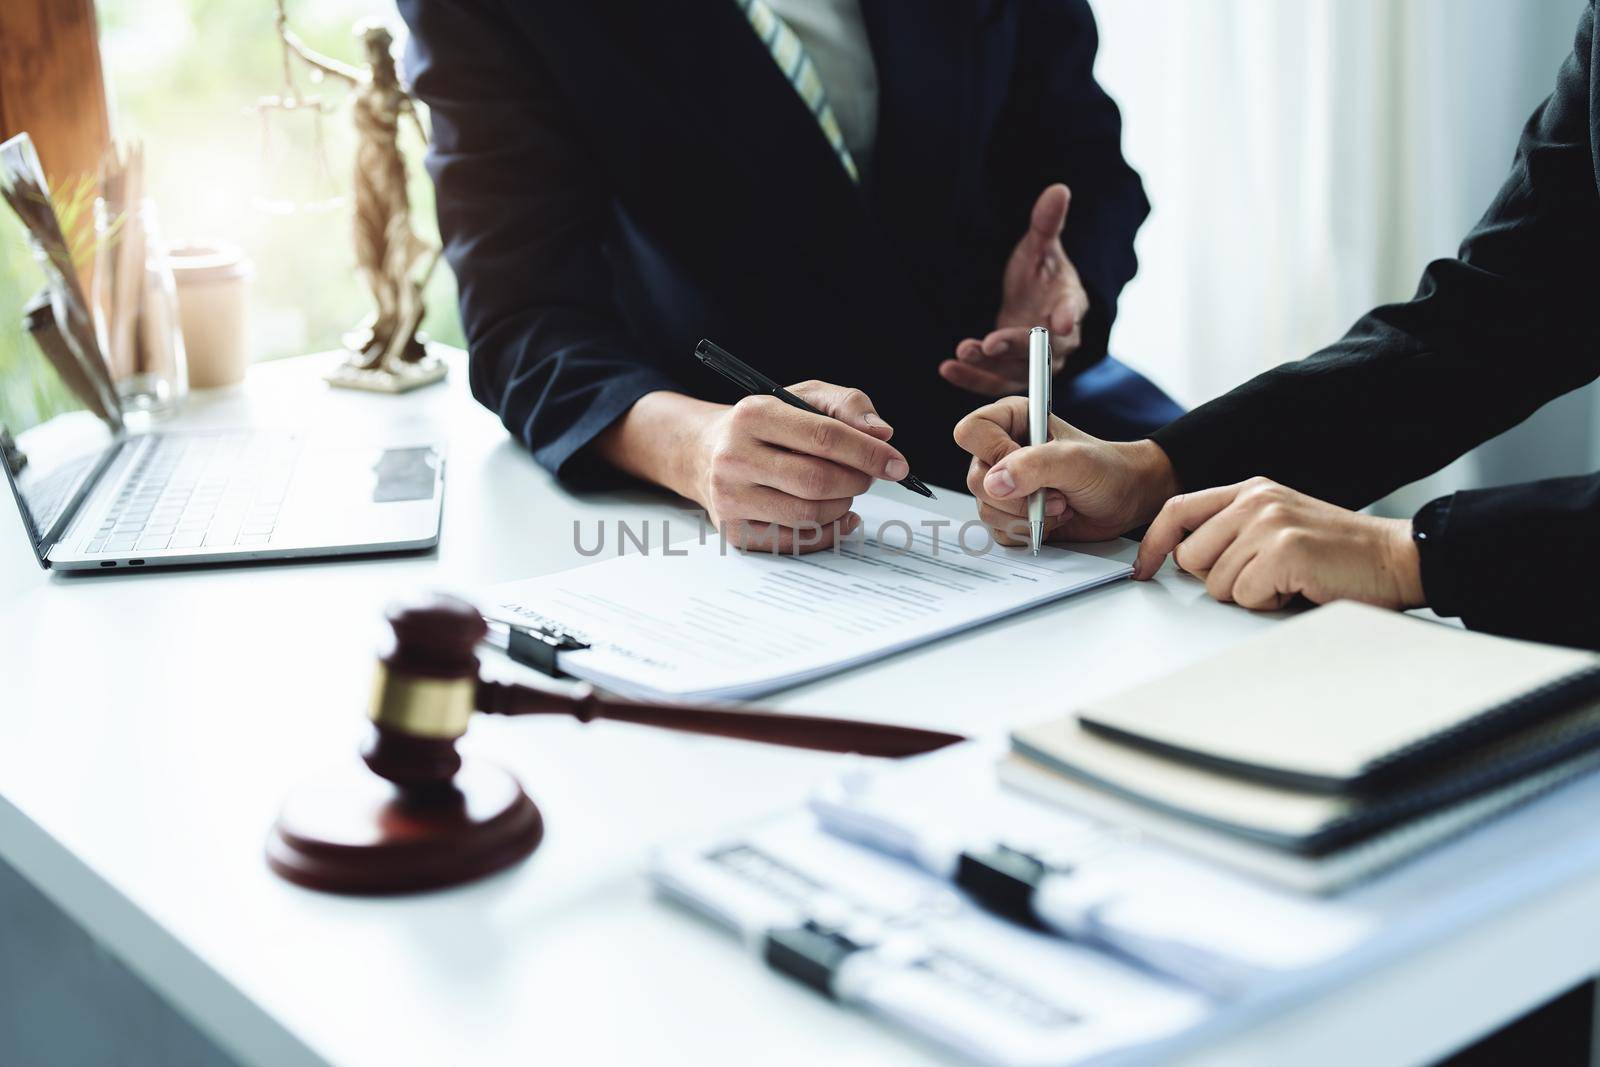 Law, Consultation, Agreement, Contract, Attorney or Lawyer holding a pen is consulting with a client to explain the pattern of answering questions before going to court to decide a lawsuit